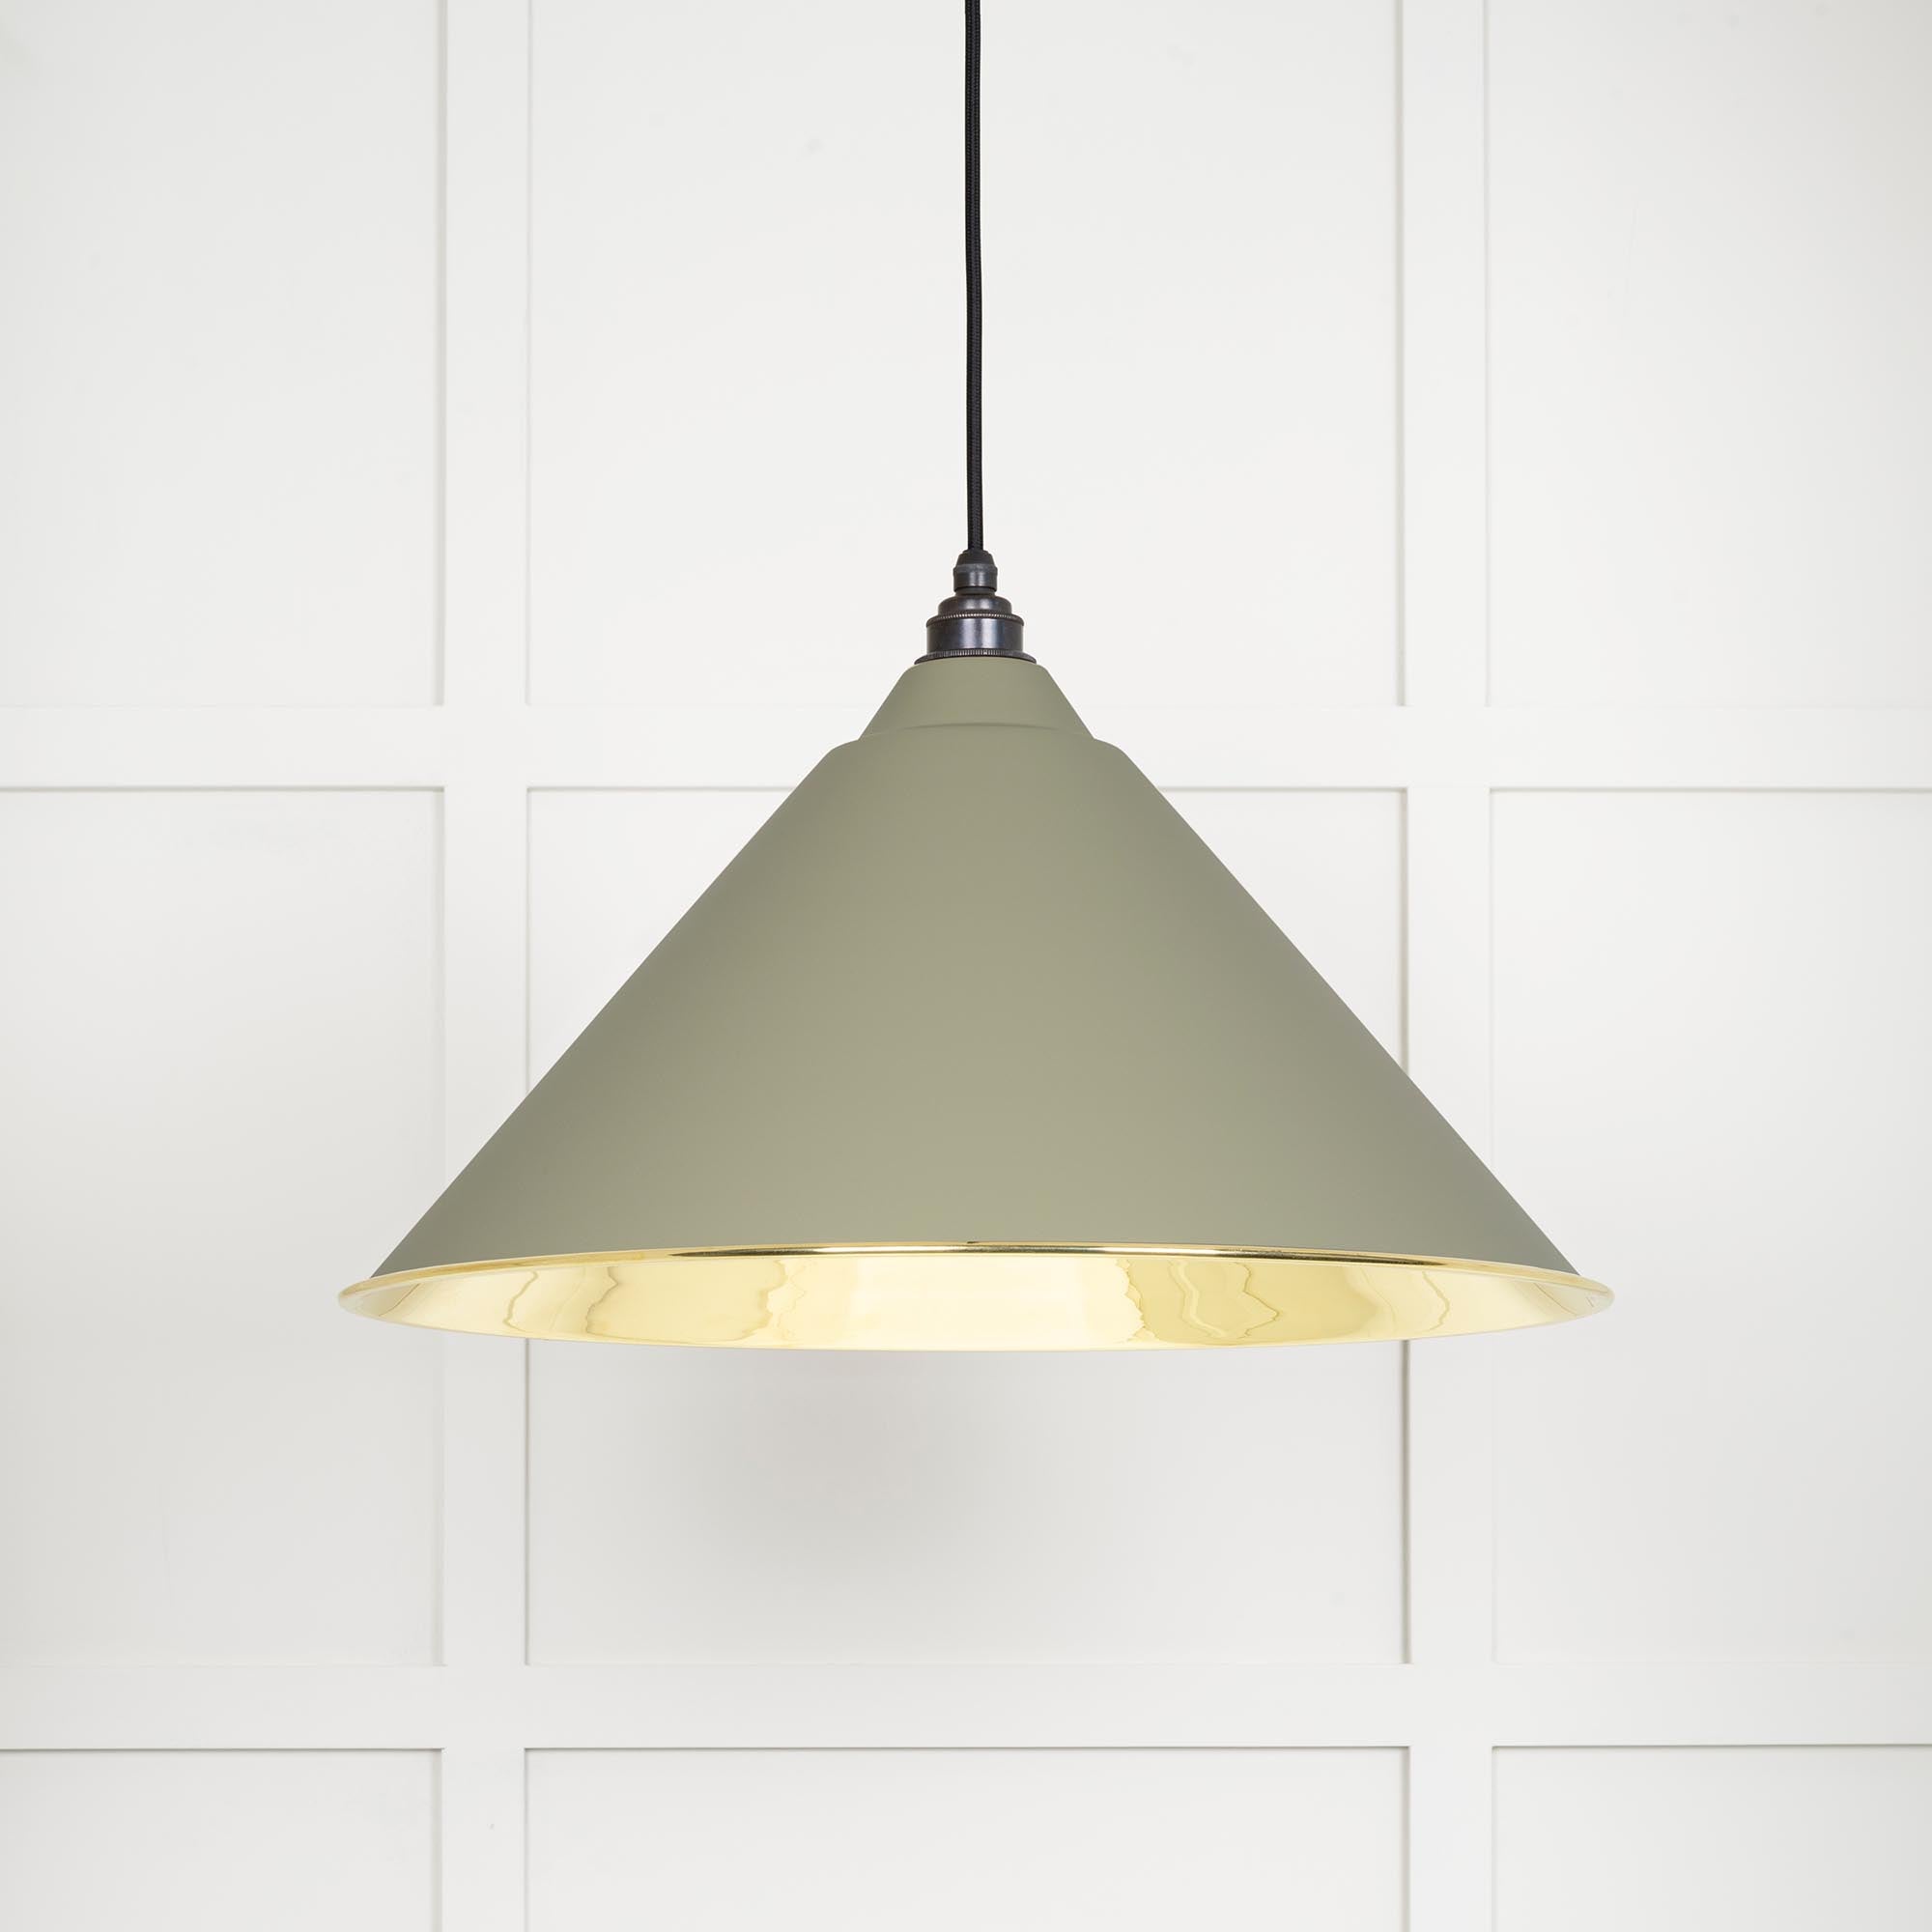 Image of Hockley Ceiling Light in Tump